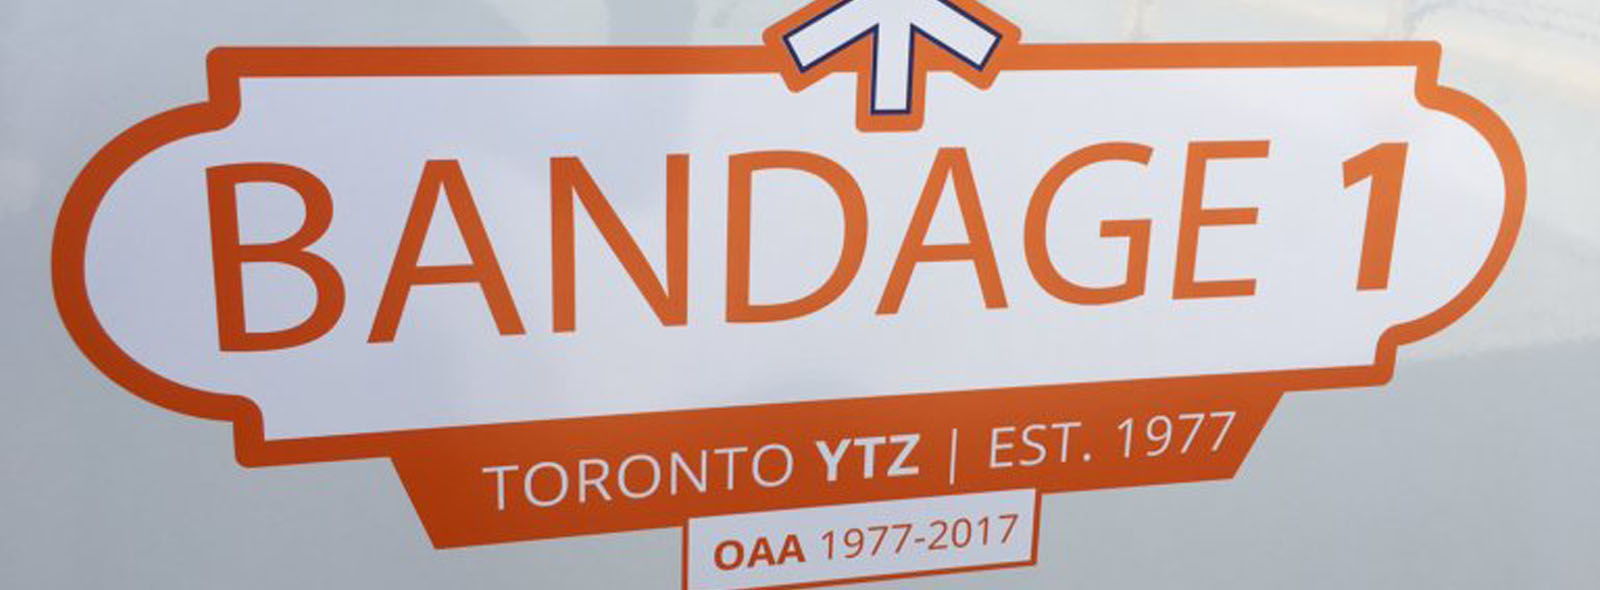 The new Bandage 1 decal to be placed on Ornge vehicles